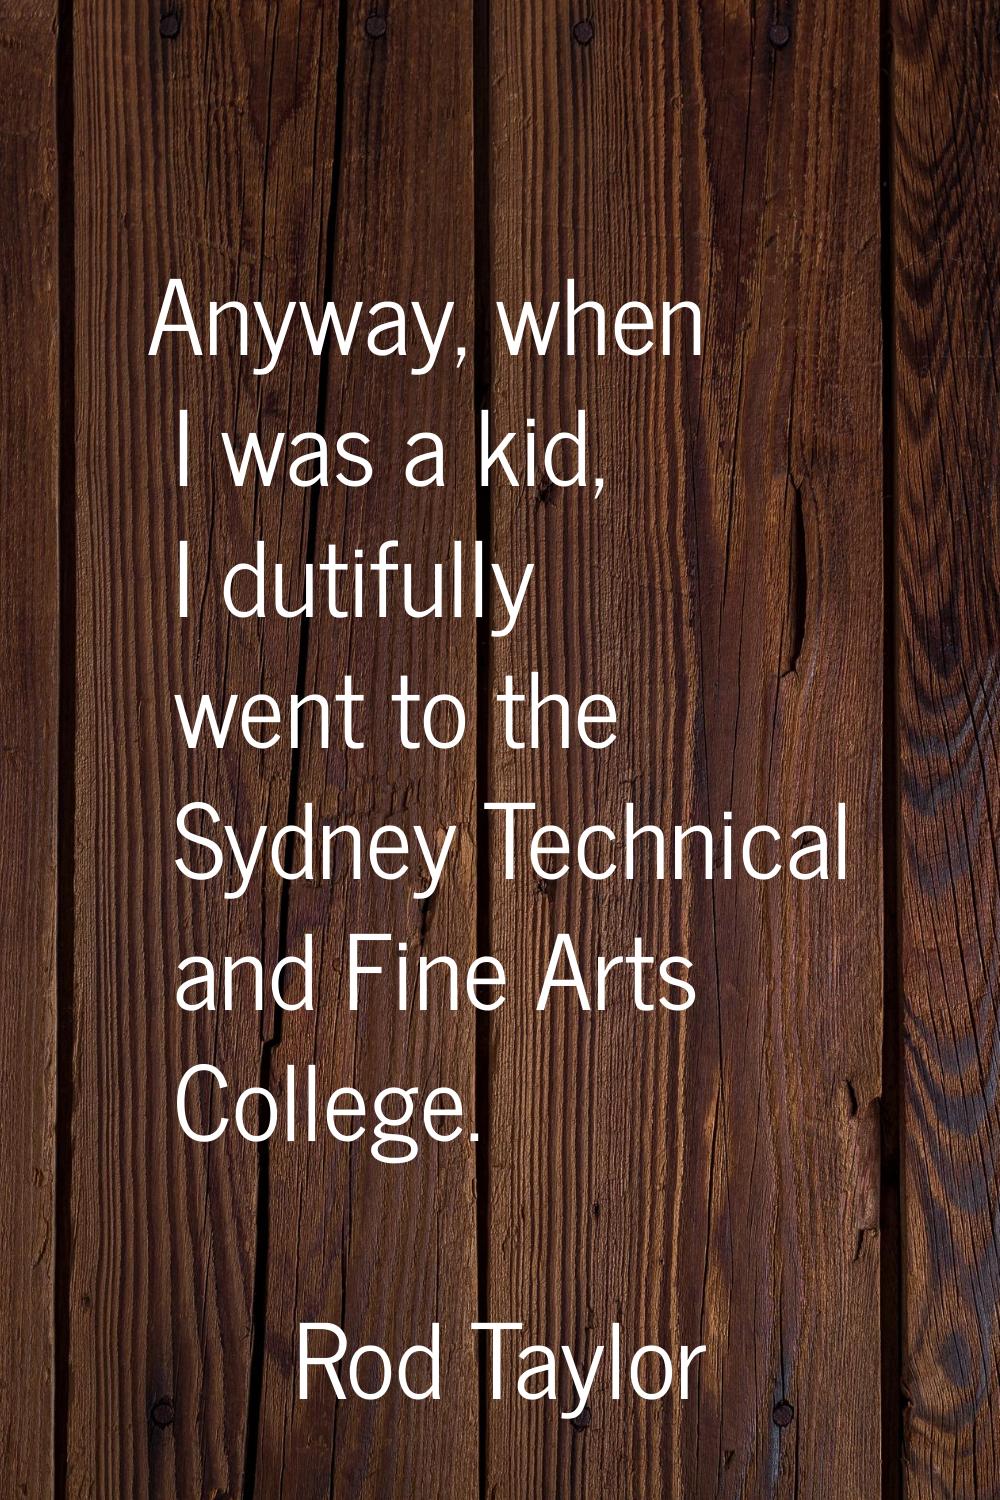 Anyway, when I was a kid, I dutifully went to the Sydney Technical and Fine Arts College.